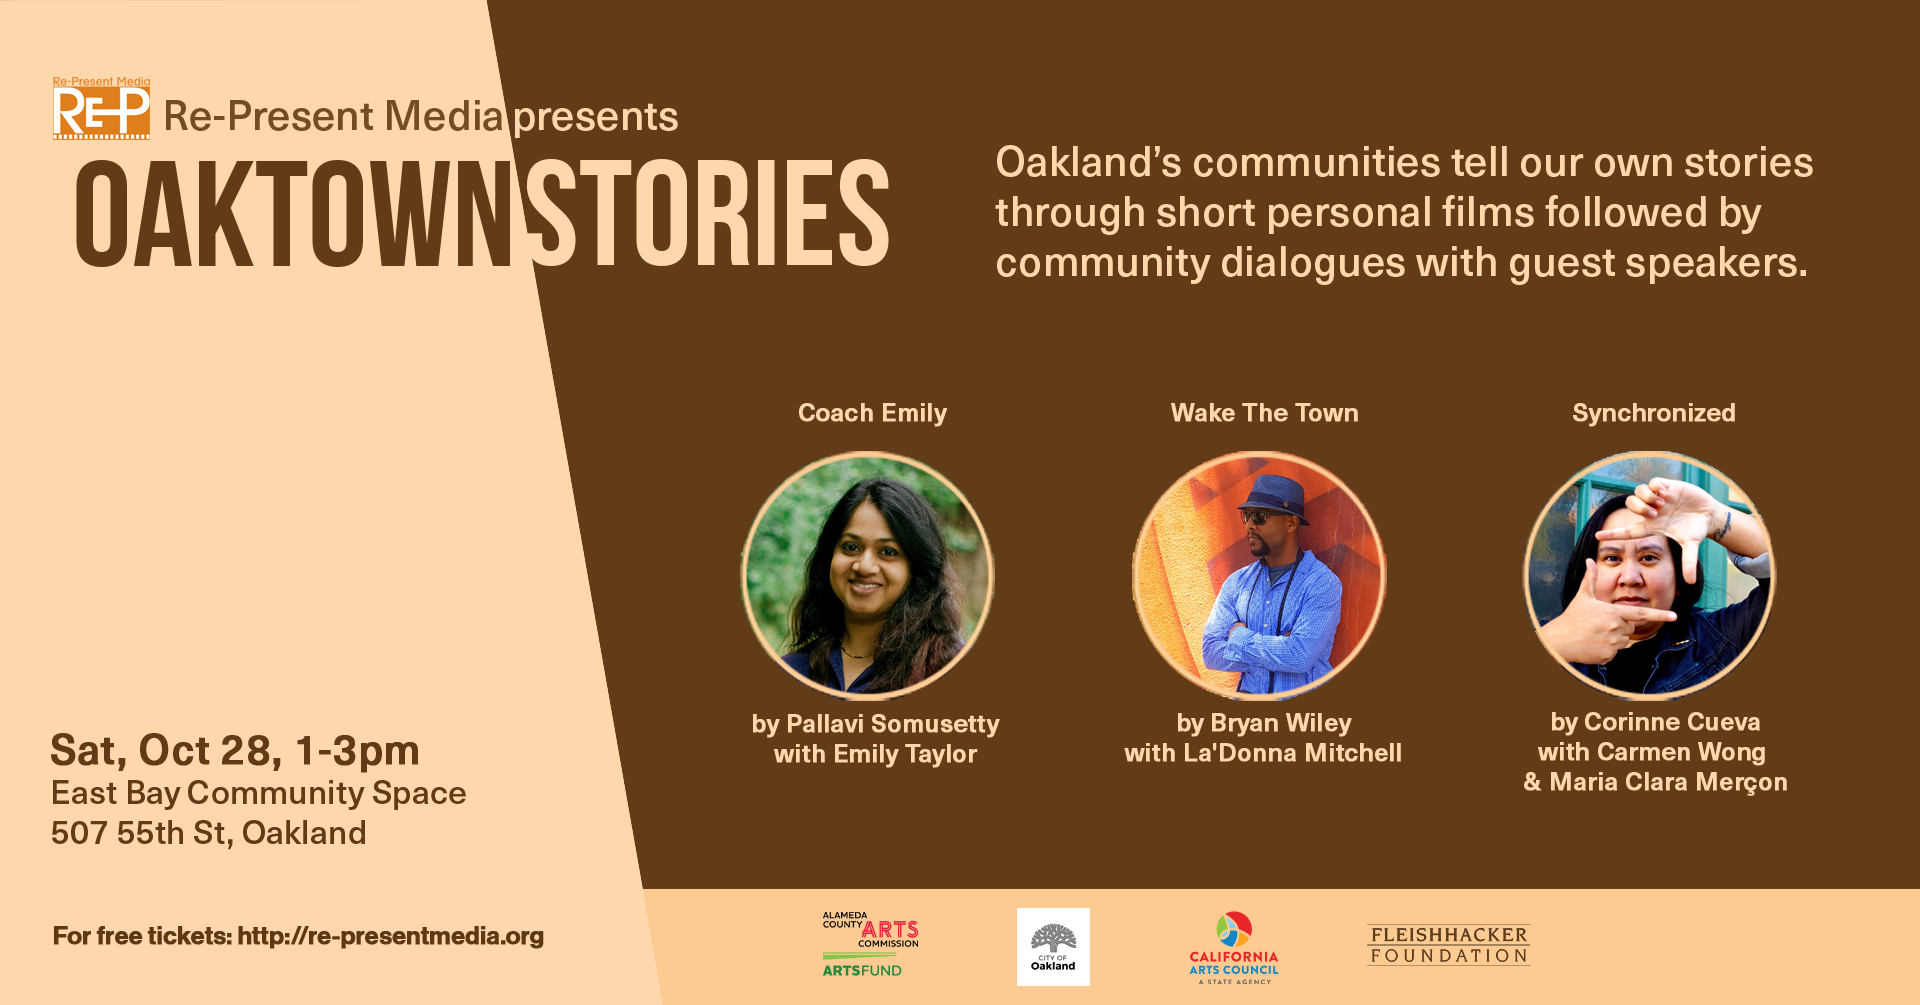 Oaktown Stories - Oct 28 East Bay Community Space 507 55th St, Oakland, CA 94609. "Synchronized" (Corinne Cueva) With Maria Clara Merçon and Carmen Wong. "Wake The Town" (Bryan Wiley) With La'Donna Mitchell. "Coach Emily" (Pallavi Somusetty) With Emily Taylor. For free tickets: https://re-presentmedia.ticketleap.com/oaktownstories2023-3